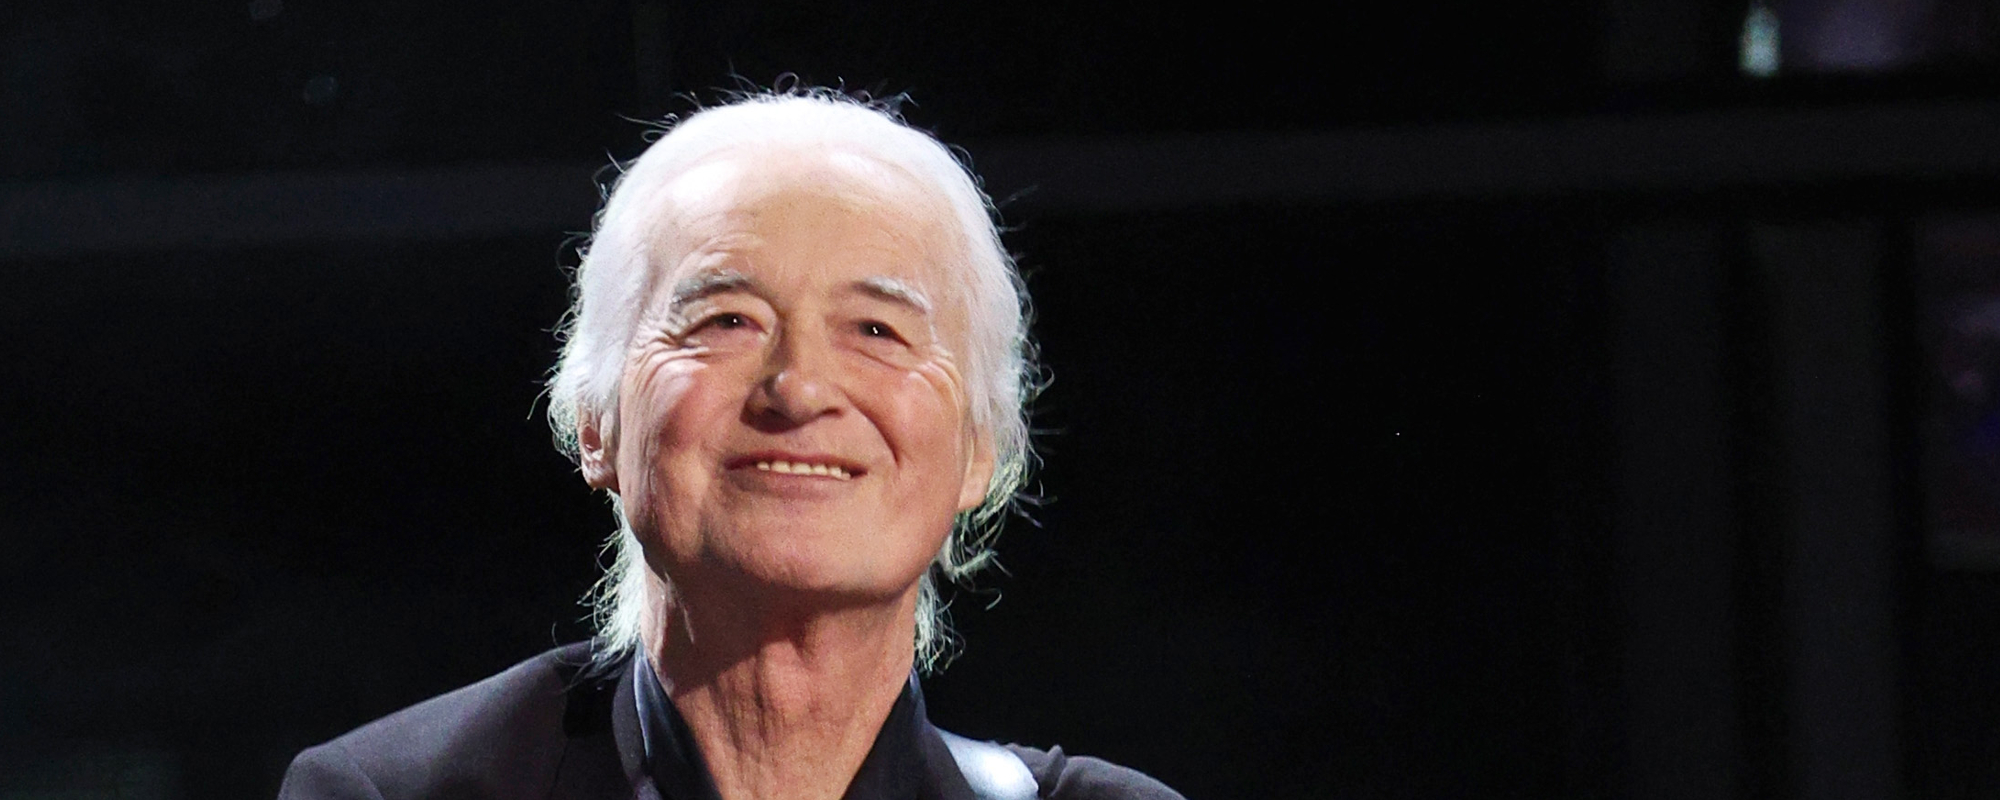 Led Zeppelin’s Jimmy Page Takes Trip Down Memory Lane in Tribute to Late Guitar Legend Duane Eddy